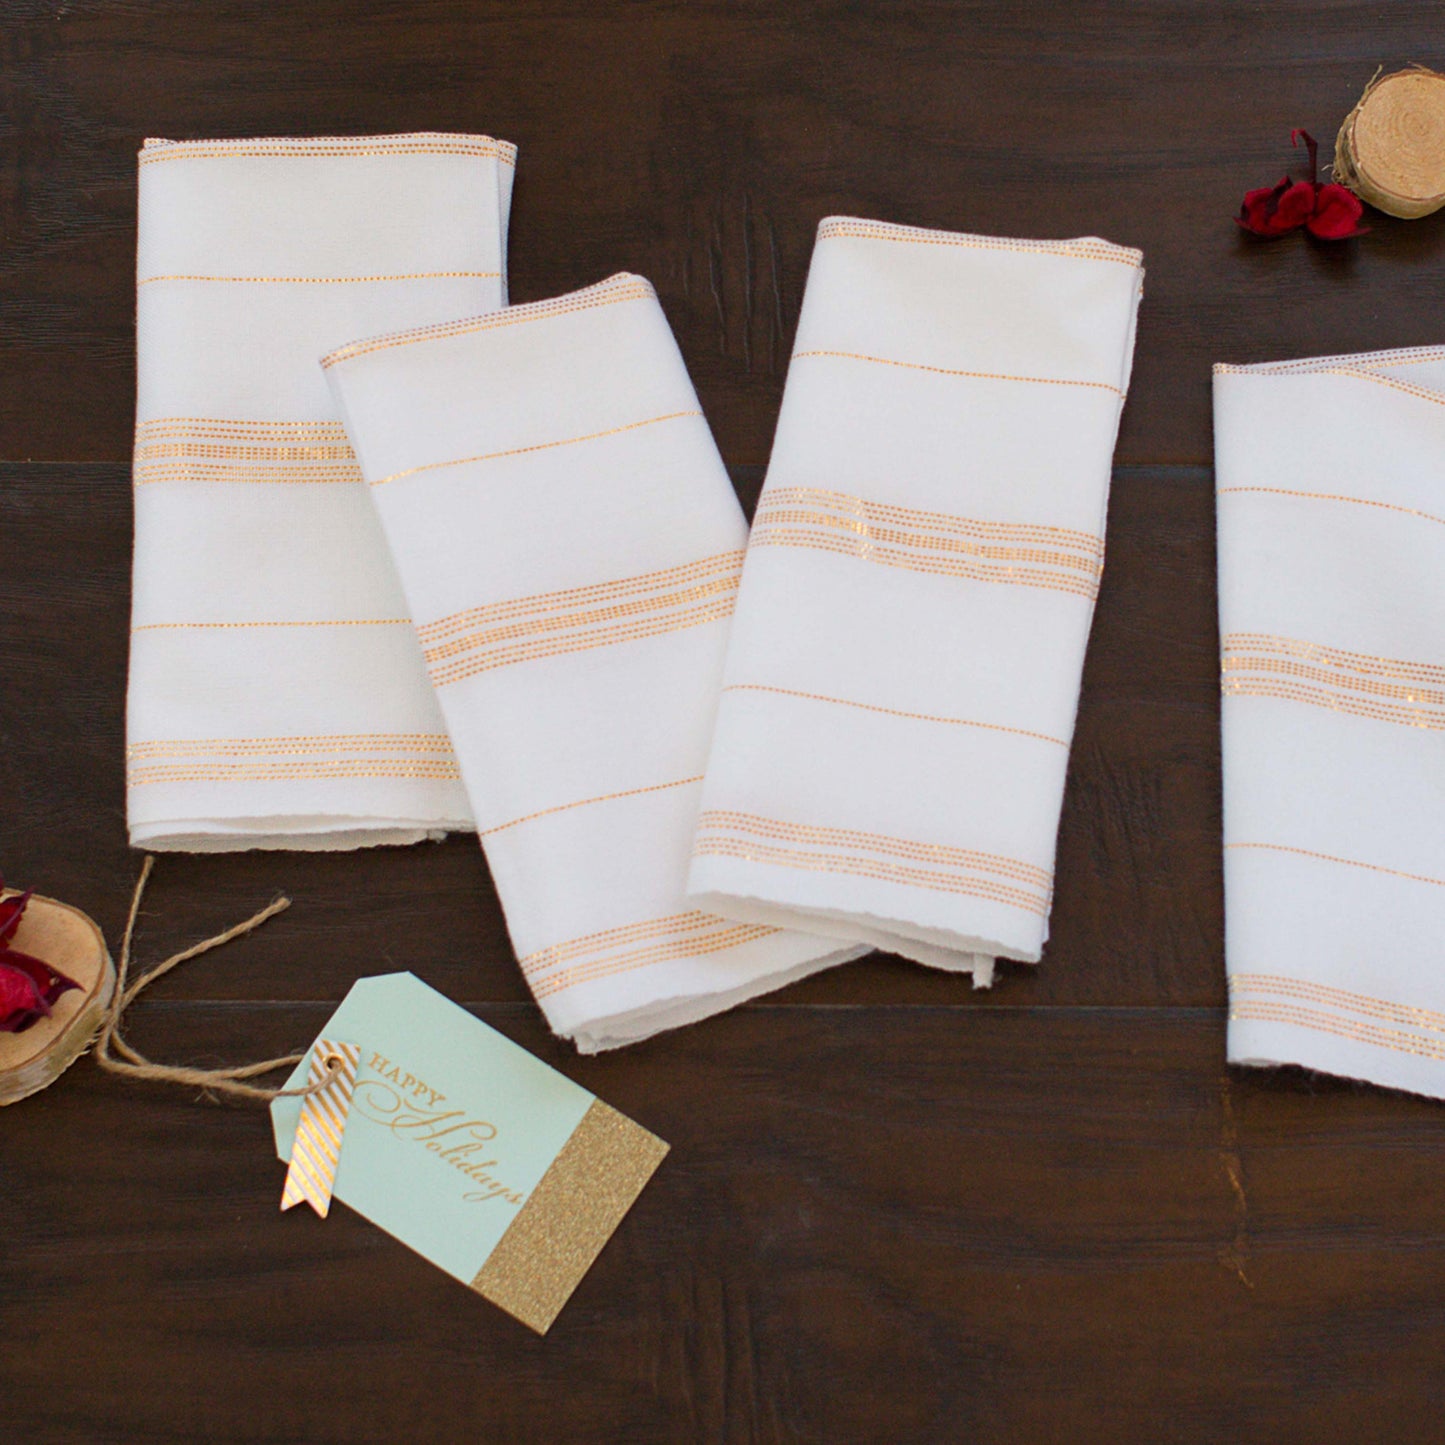 Handwoven, White Dinner Napkins, Gold Accents, Sustainable, Ethically Made, Set 4